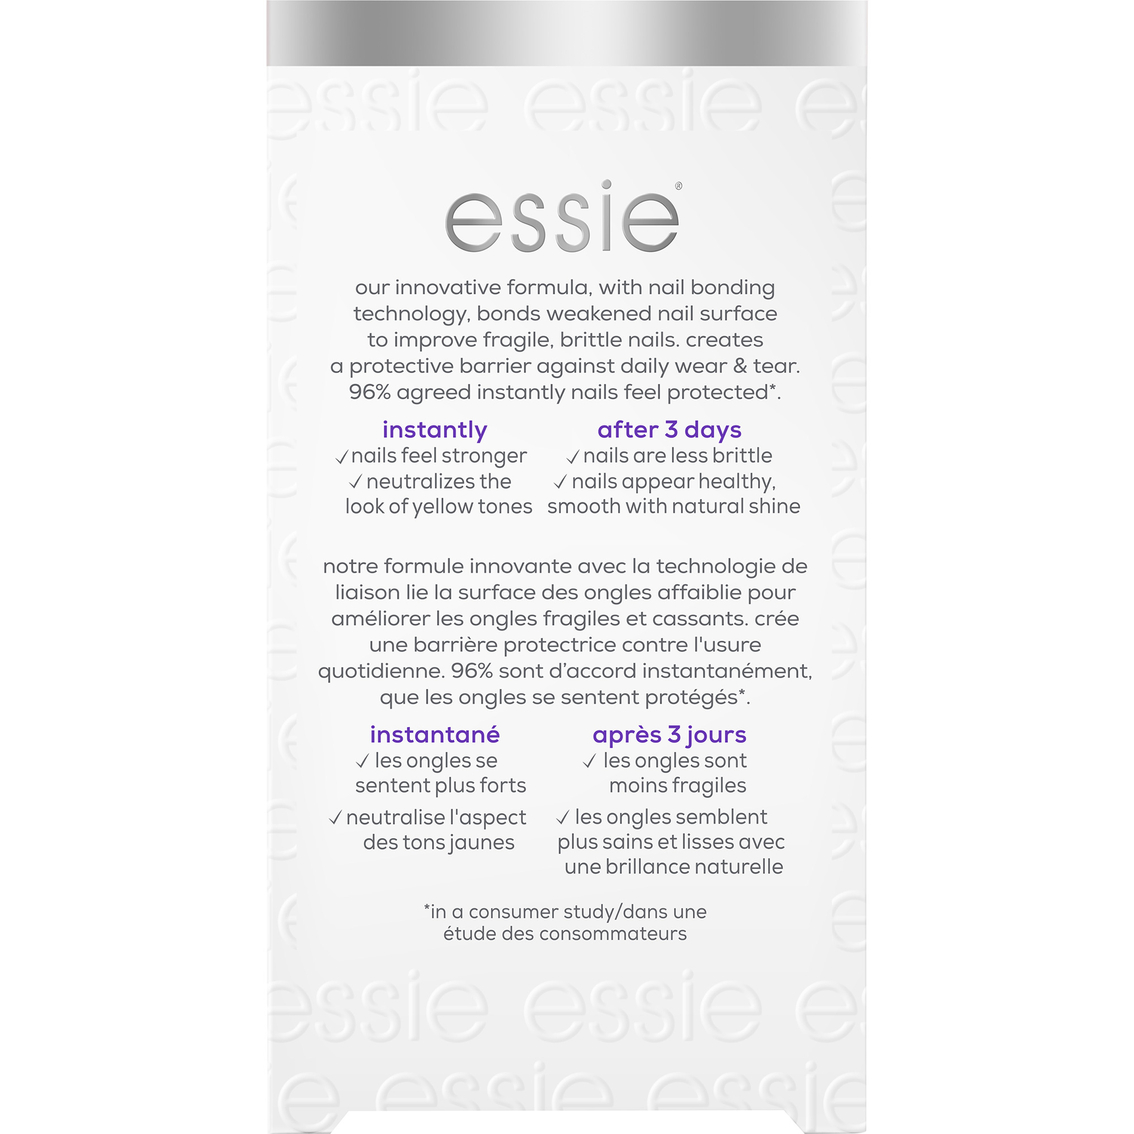 Essie Hard to Resist Nail Strengthener Treatment - Image 5 of 7